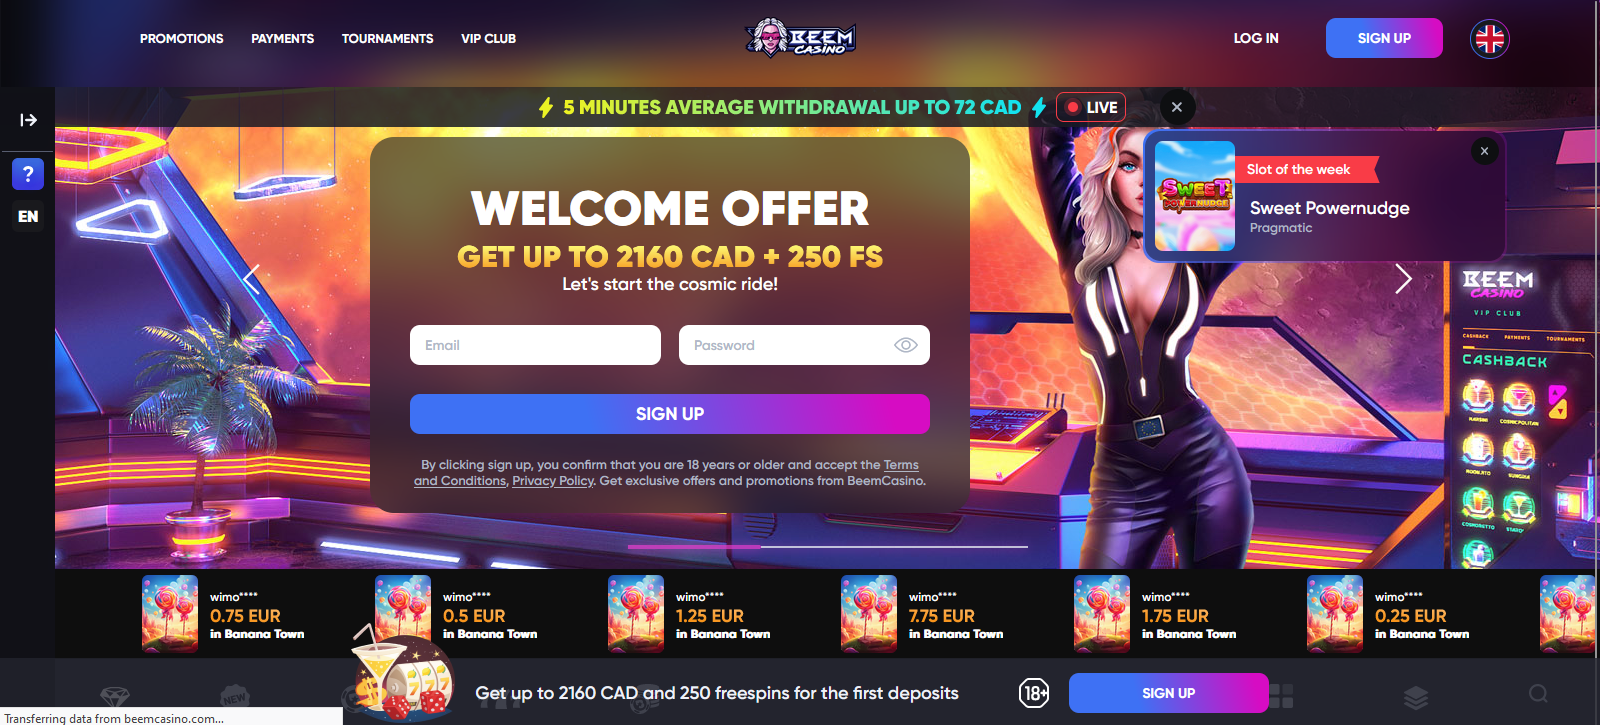 Beem Casino review for Kuwait